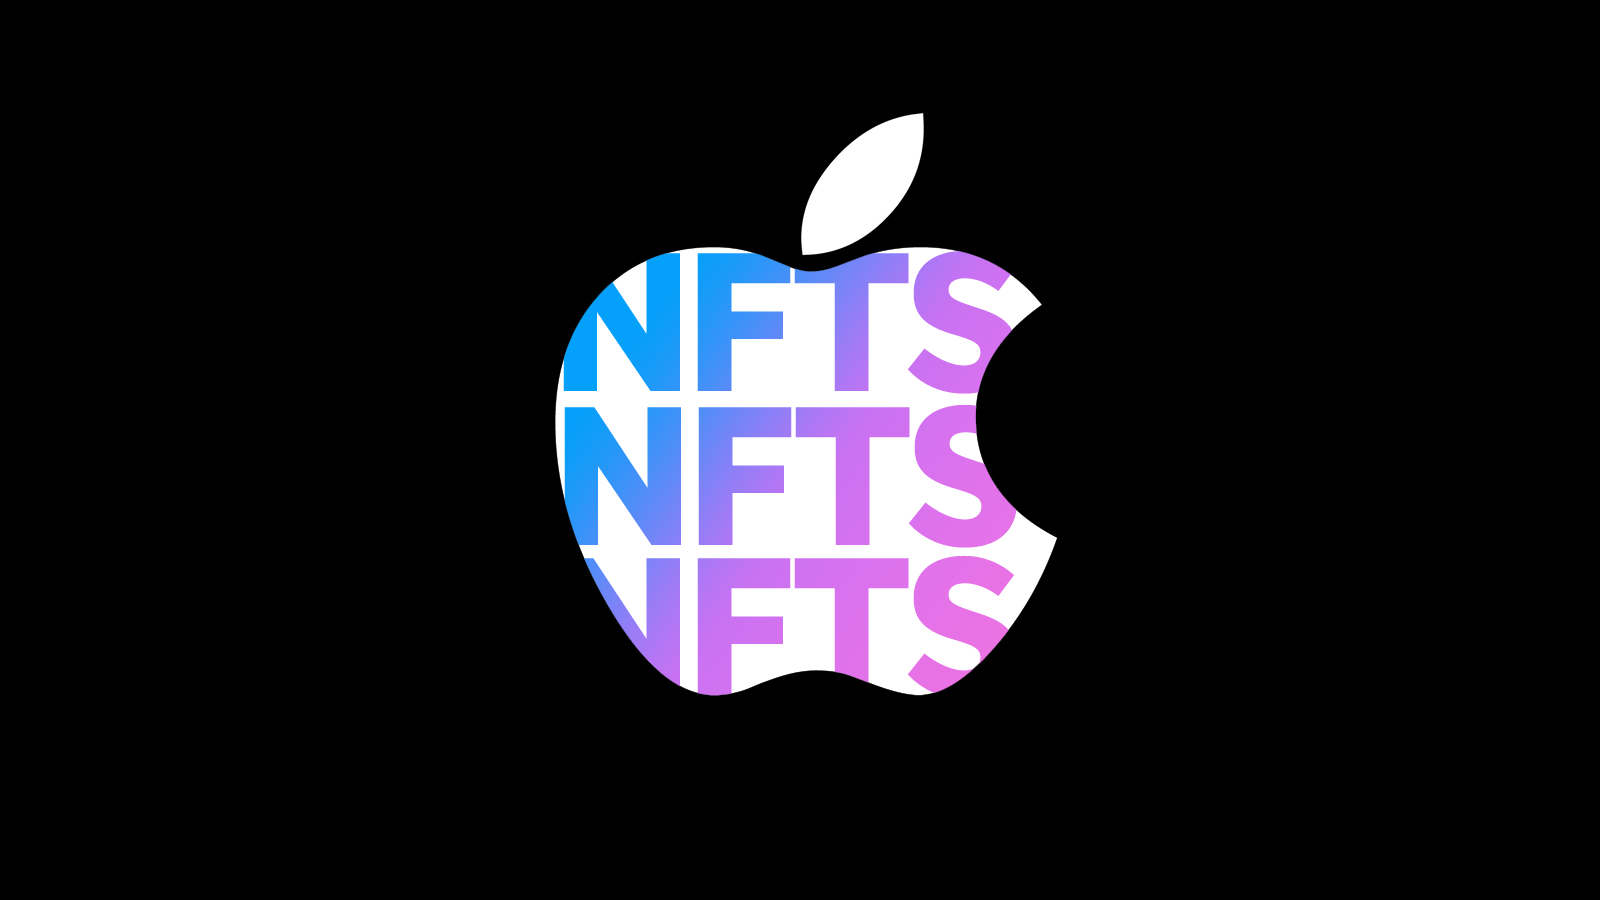 Why People Are Furious About Apple’s NFT Integration